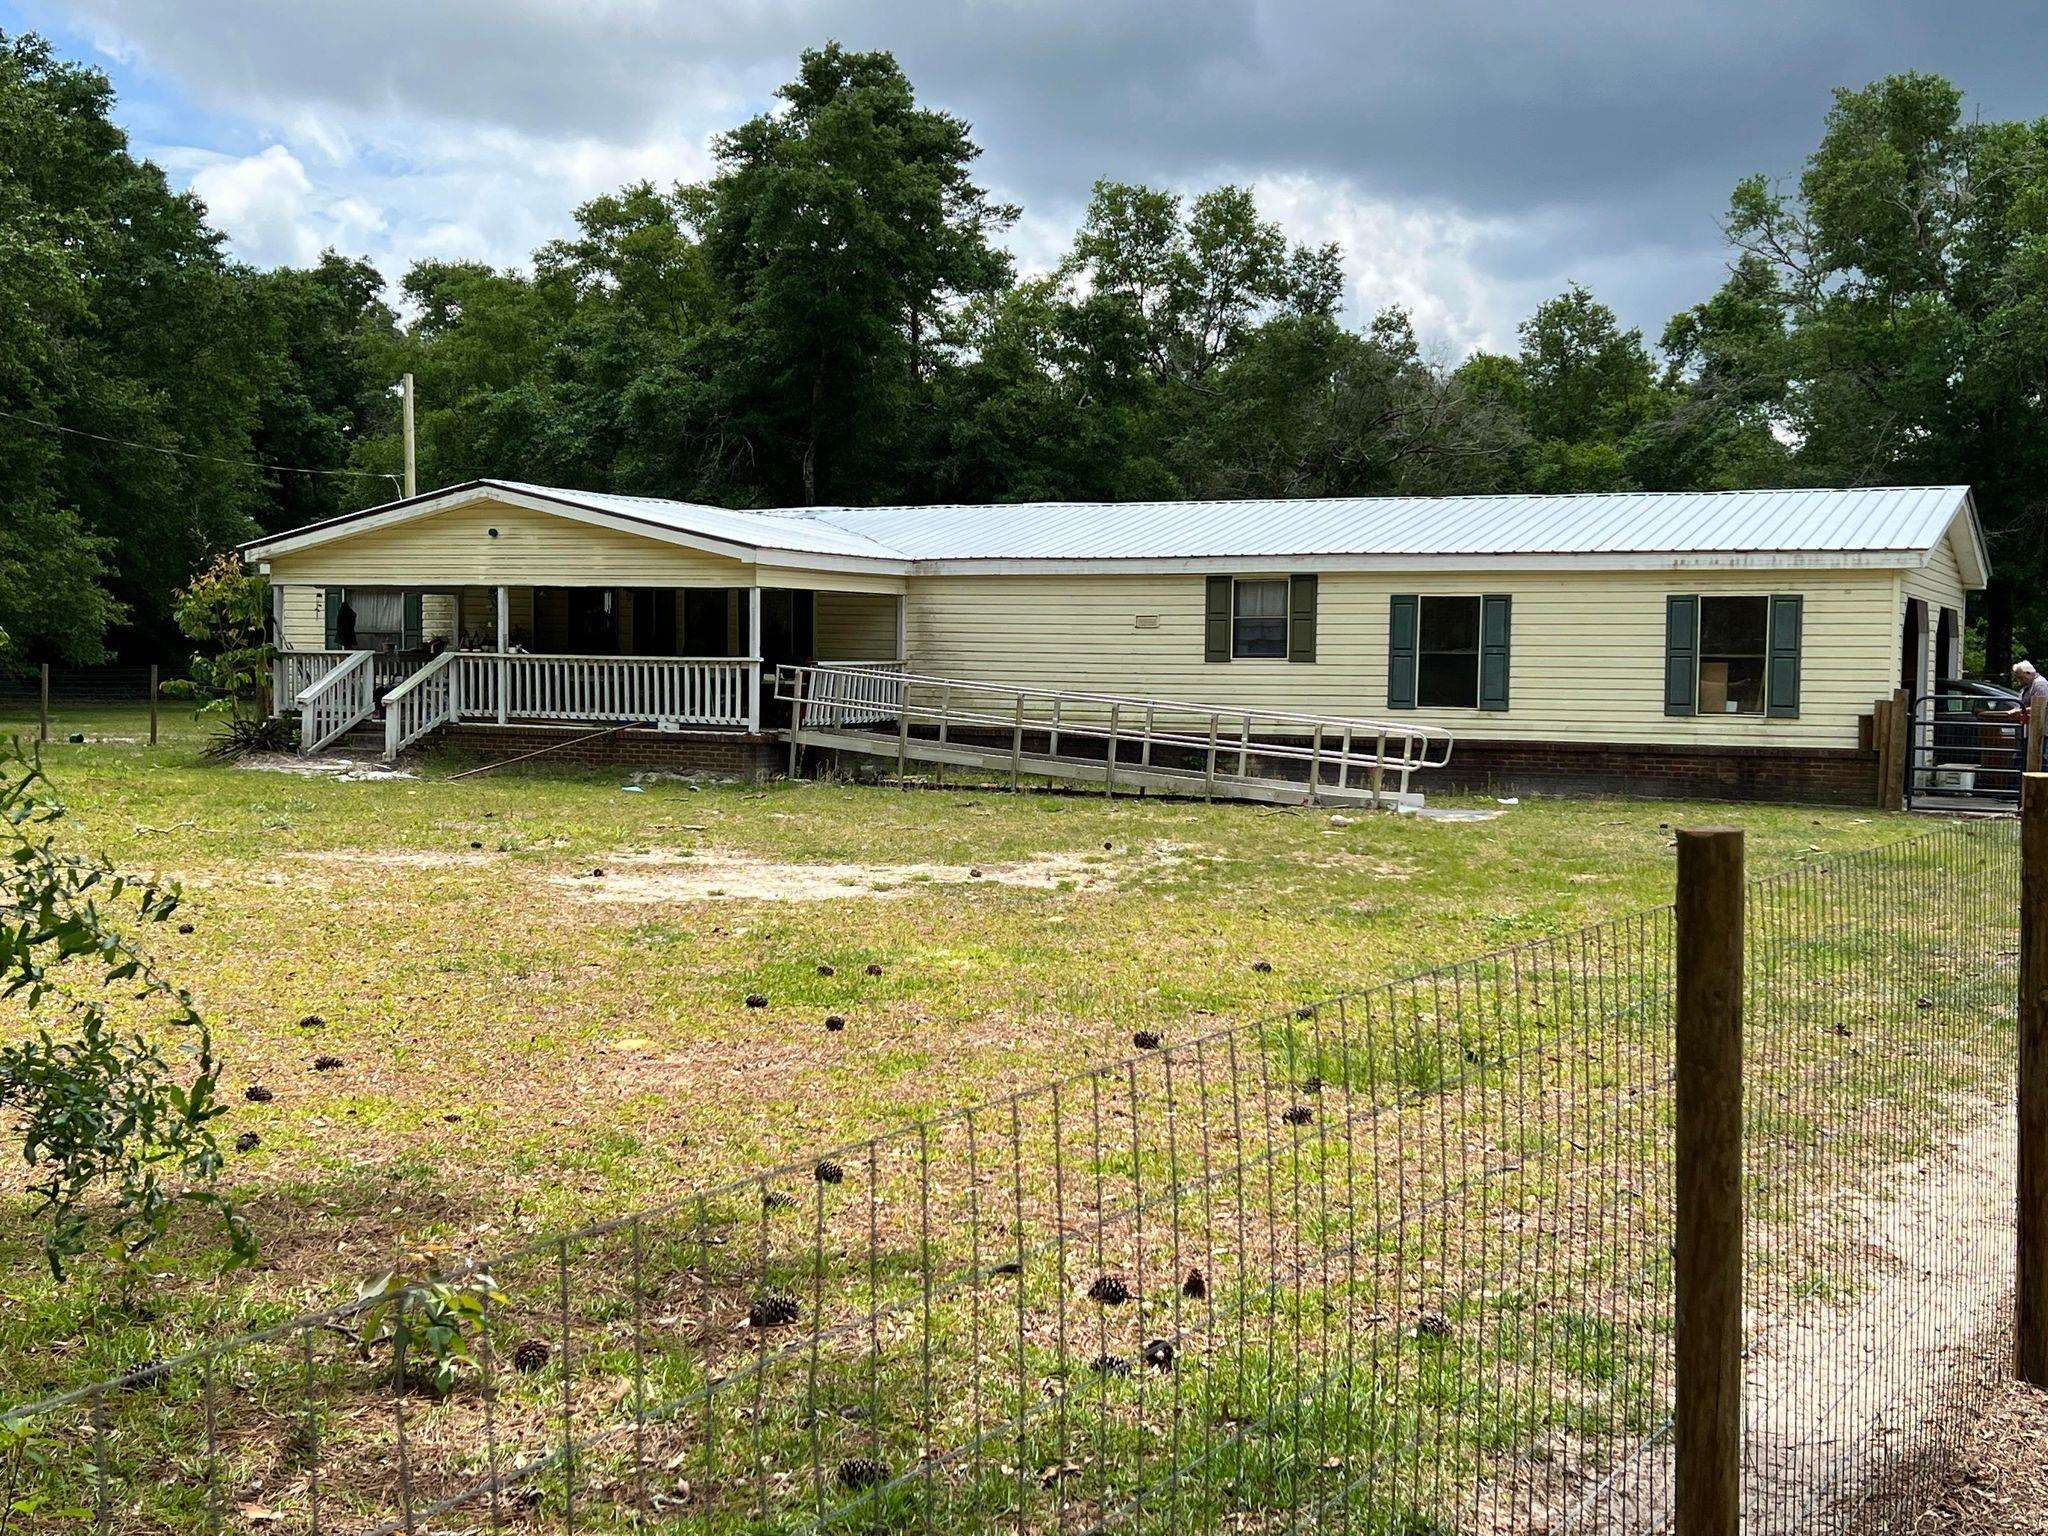 Large double-wide mobile home located on Old Federal Road in Gadsden County.  9.3 acres, 2 bedroom, 2 bath.  One room was converted into a sitting room but could easily be converted back to a 3rd bedroom.  2 carport attached garage.  Floors have recently been replaced, 20-21 AC, 20-21 metal roof, 20-21 septic tank & drain field.  Front yard recently fenced.  Front & back porches for peaceful porch sitting and serenity on stressful days. Home has had a lot of upgrades.